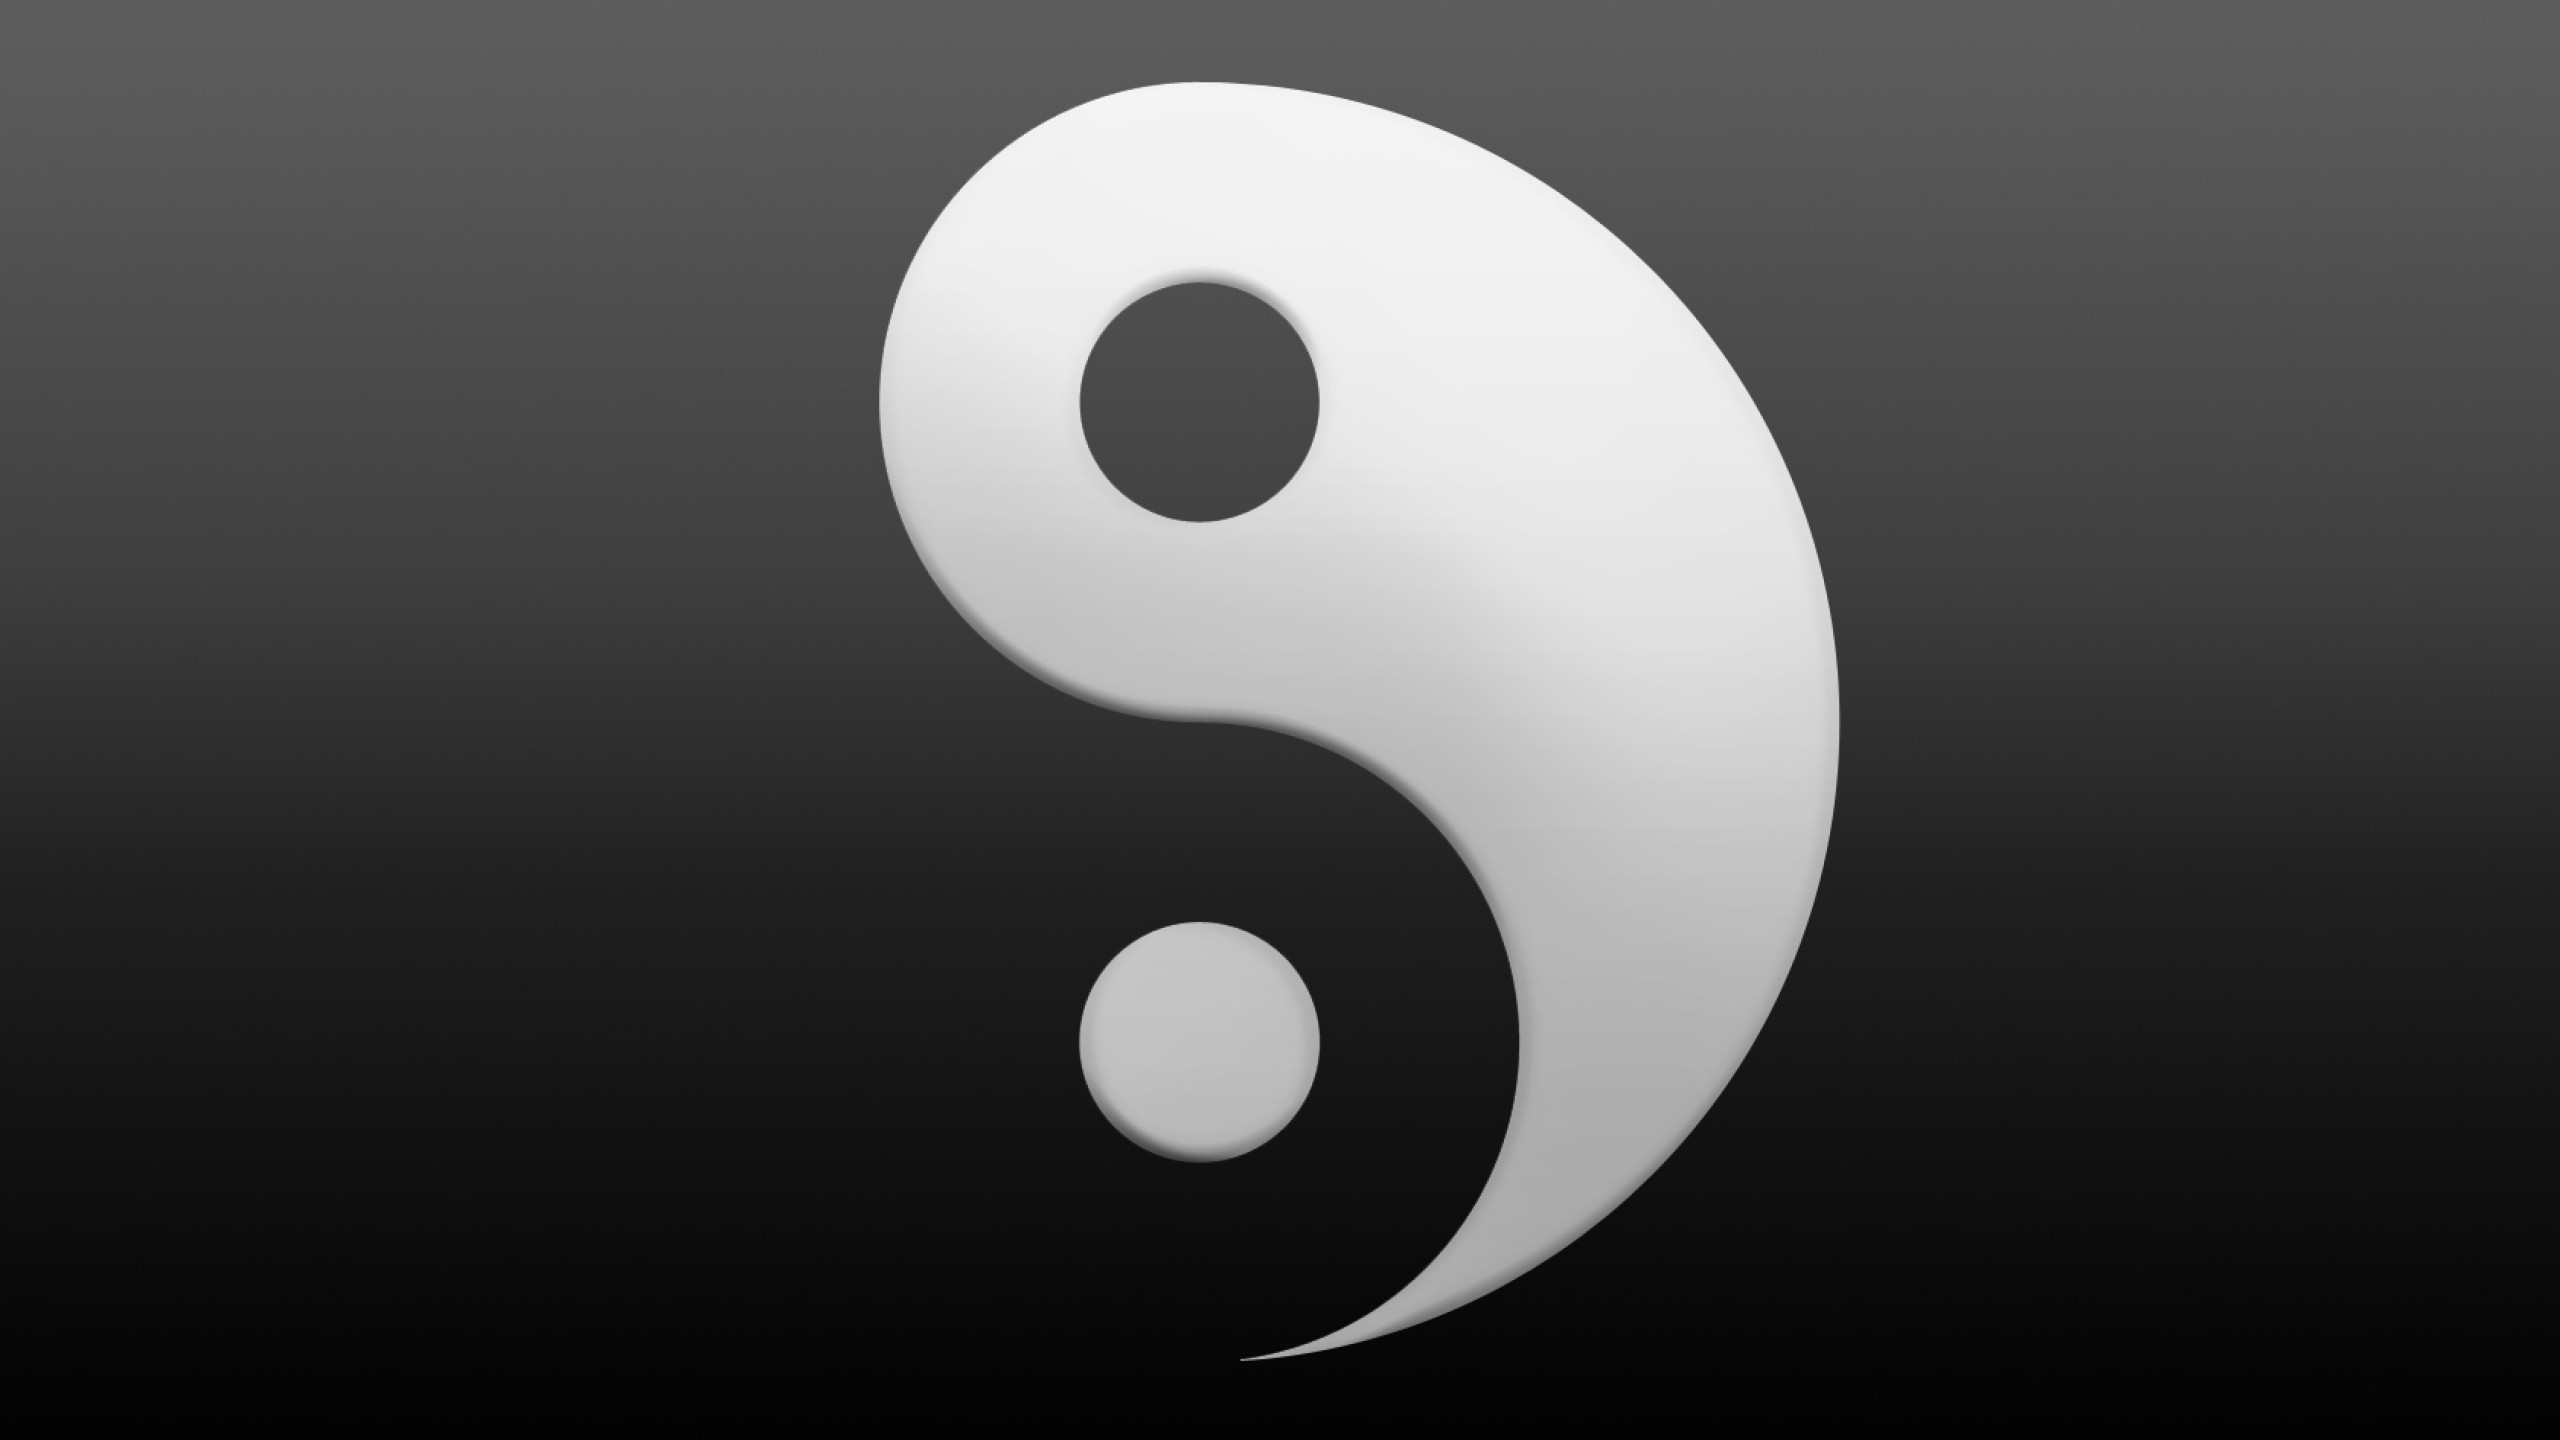 General 2560x1440 Yin and Yang monochrome simple background gradient gray background